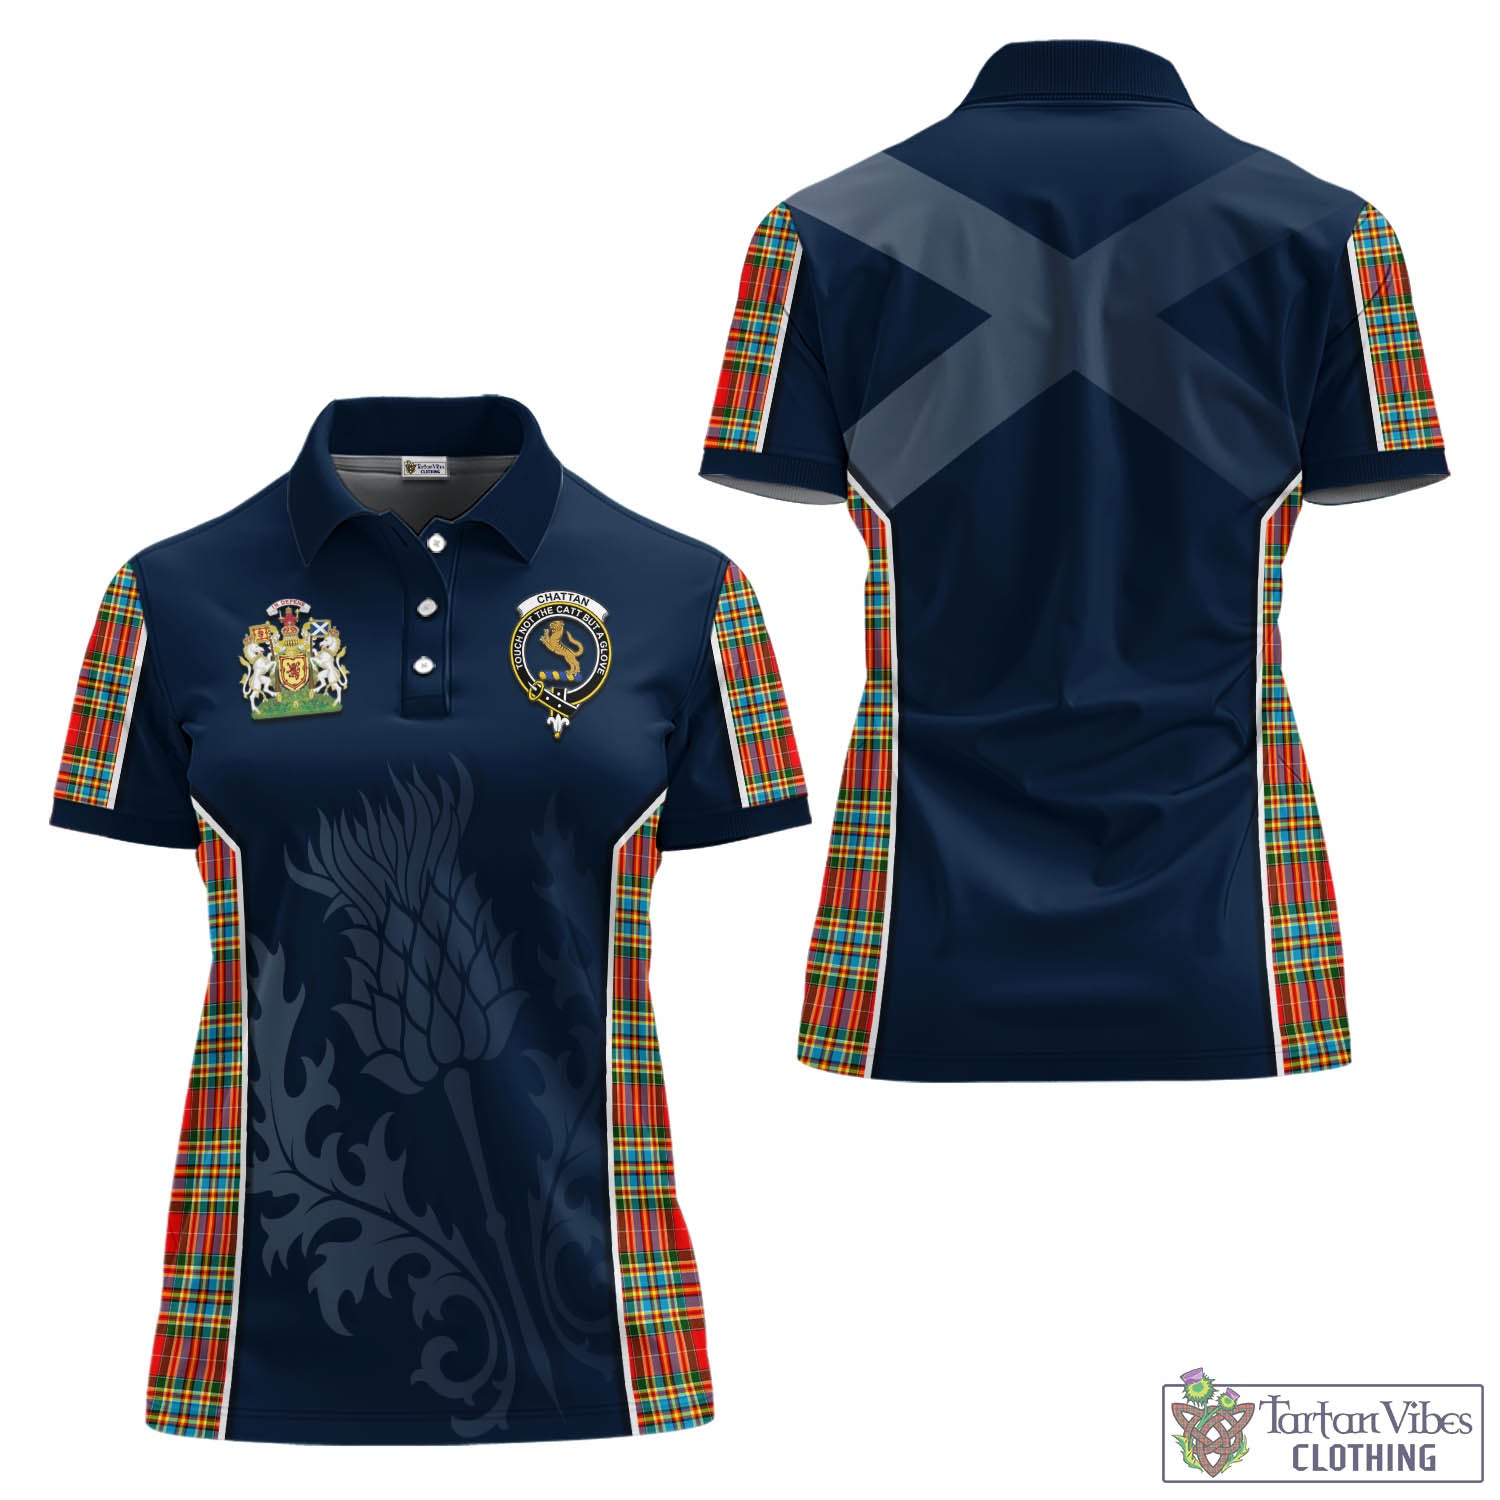 Tartan Vibes Clothing Chattan Tartan Women's Polo Shirt with Family Crest and Scottish Thistle Vibes Sport Style